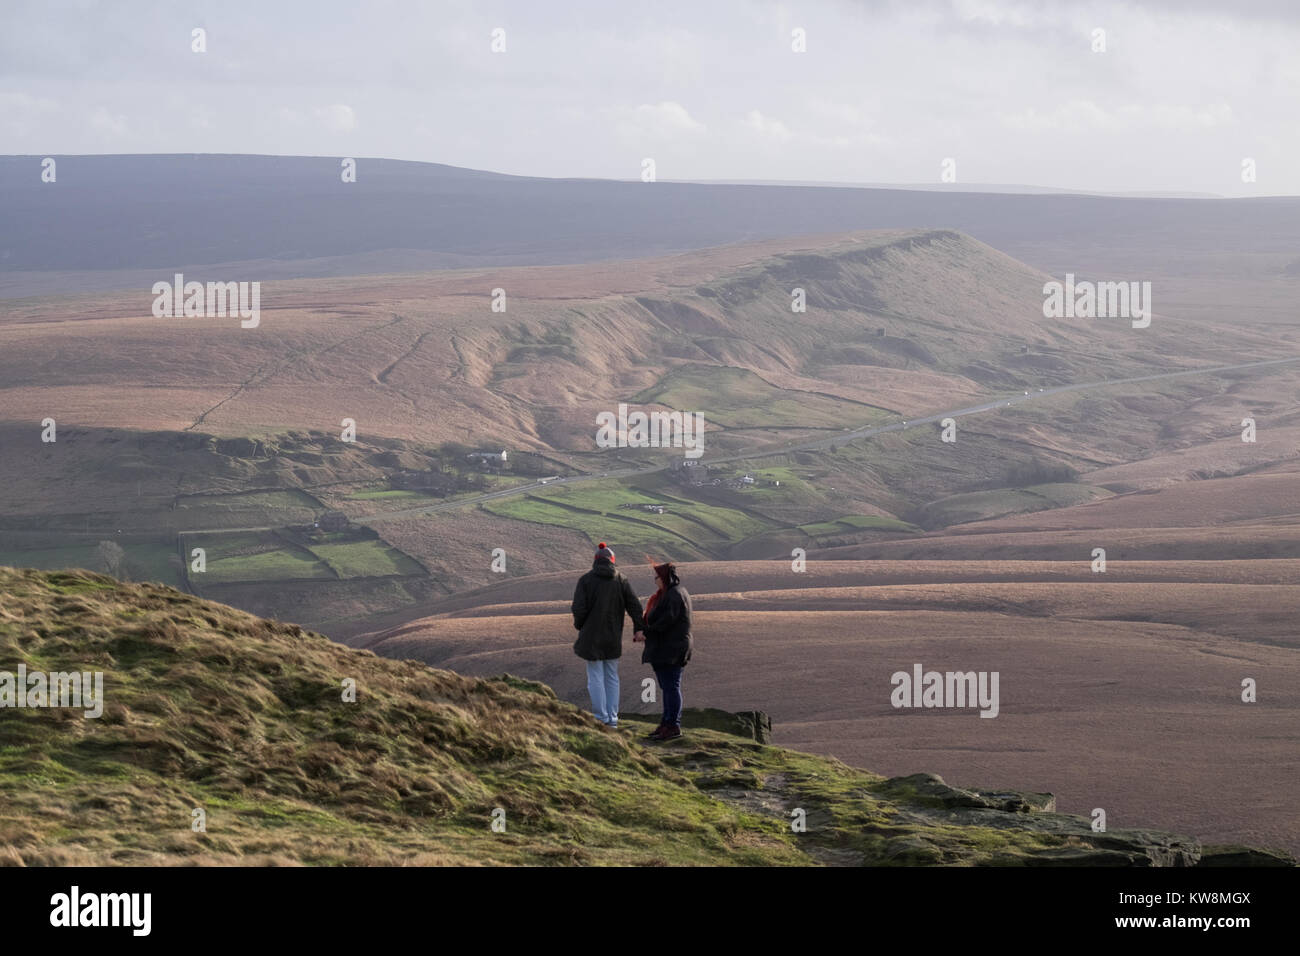 Buckstones, UK. 31st December, 2017. People enjoying the sunny but breezy weather in Buckstones overlooking the landscape of Marsden Moor and Pule Hill near Huddersfield on Sunday, December 31, 2017. © Christopher Middleton/Alamy Live News Stock Photo